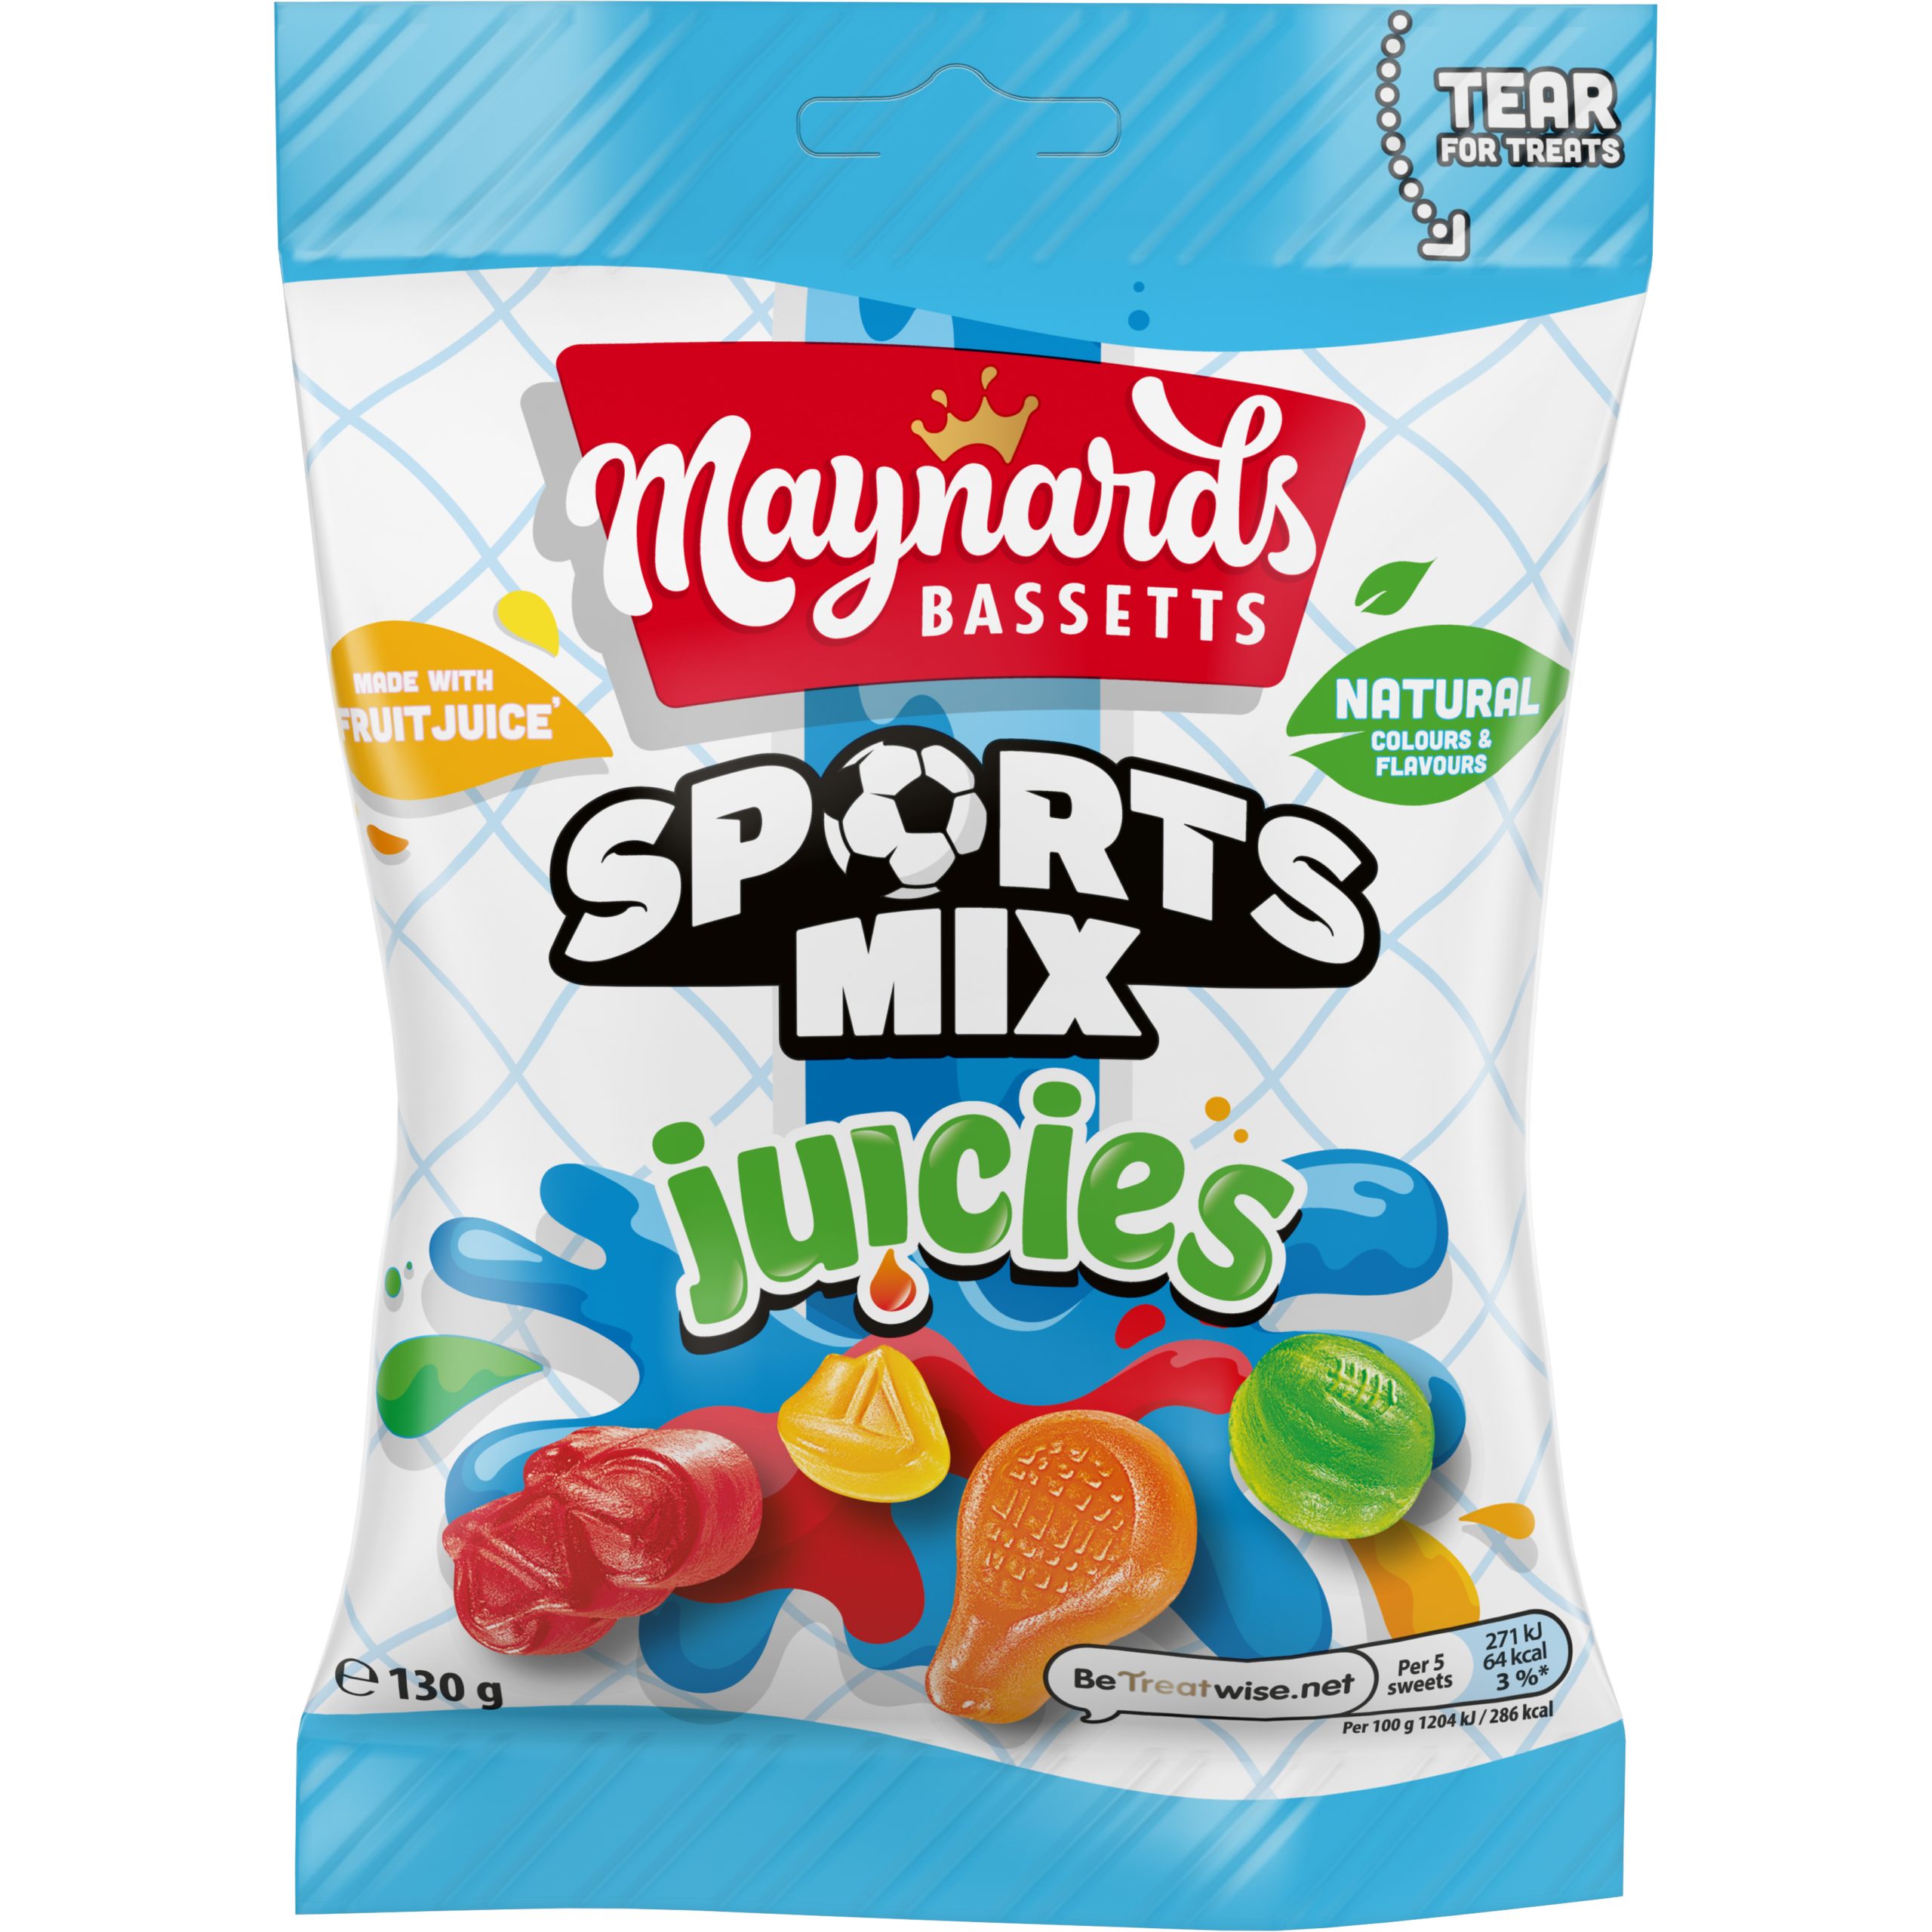 Maynards Bassetts, The Natural Confectionery Co., add HFSS-compliant range: ‘Juicies’